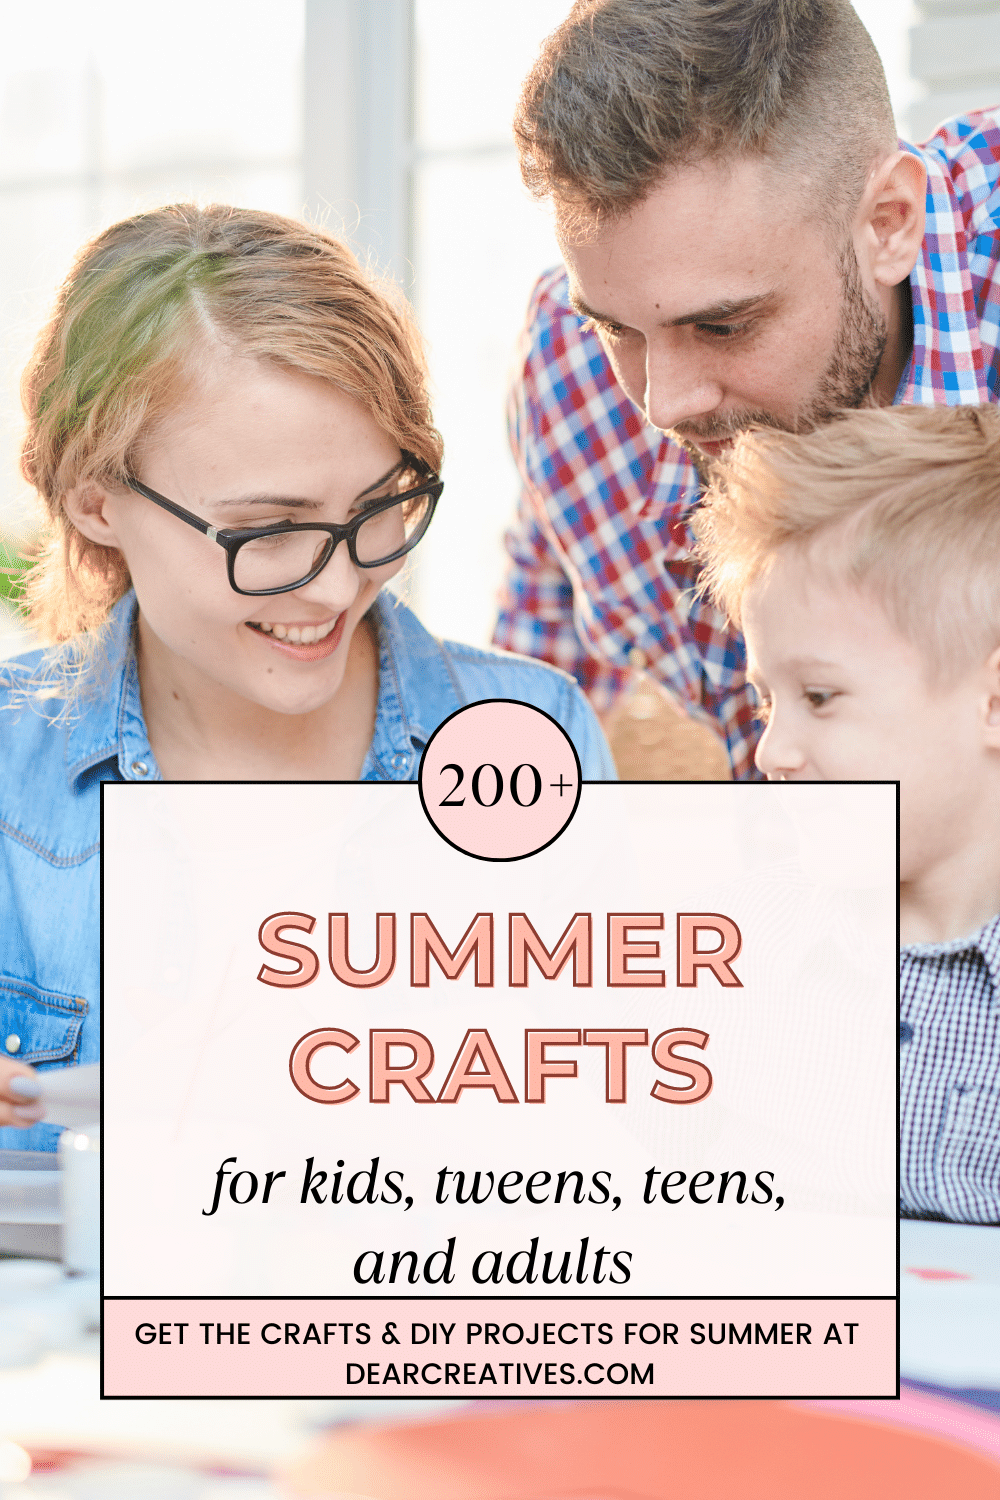 Summer Crafts - Find 200+ crafts to make this summer! Crafts for kids, tweens, teens, and adults. Find out more at DearCreatives.com